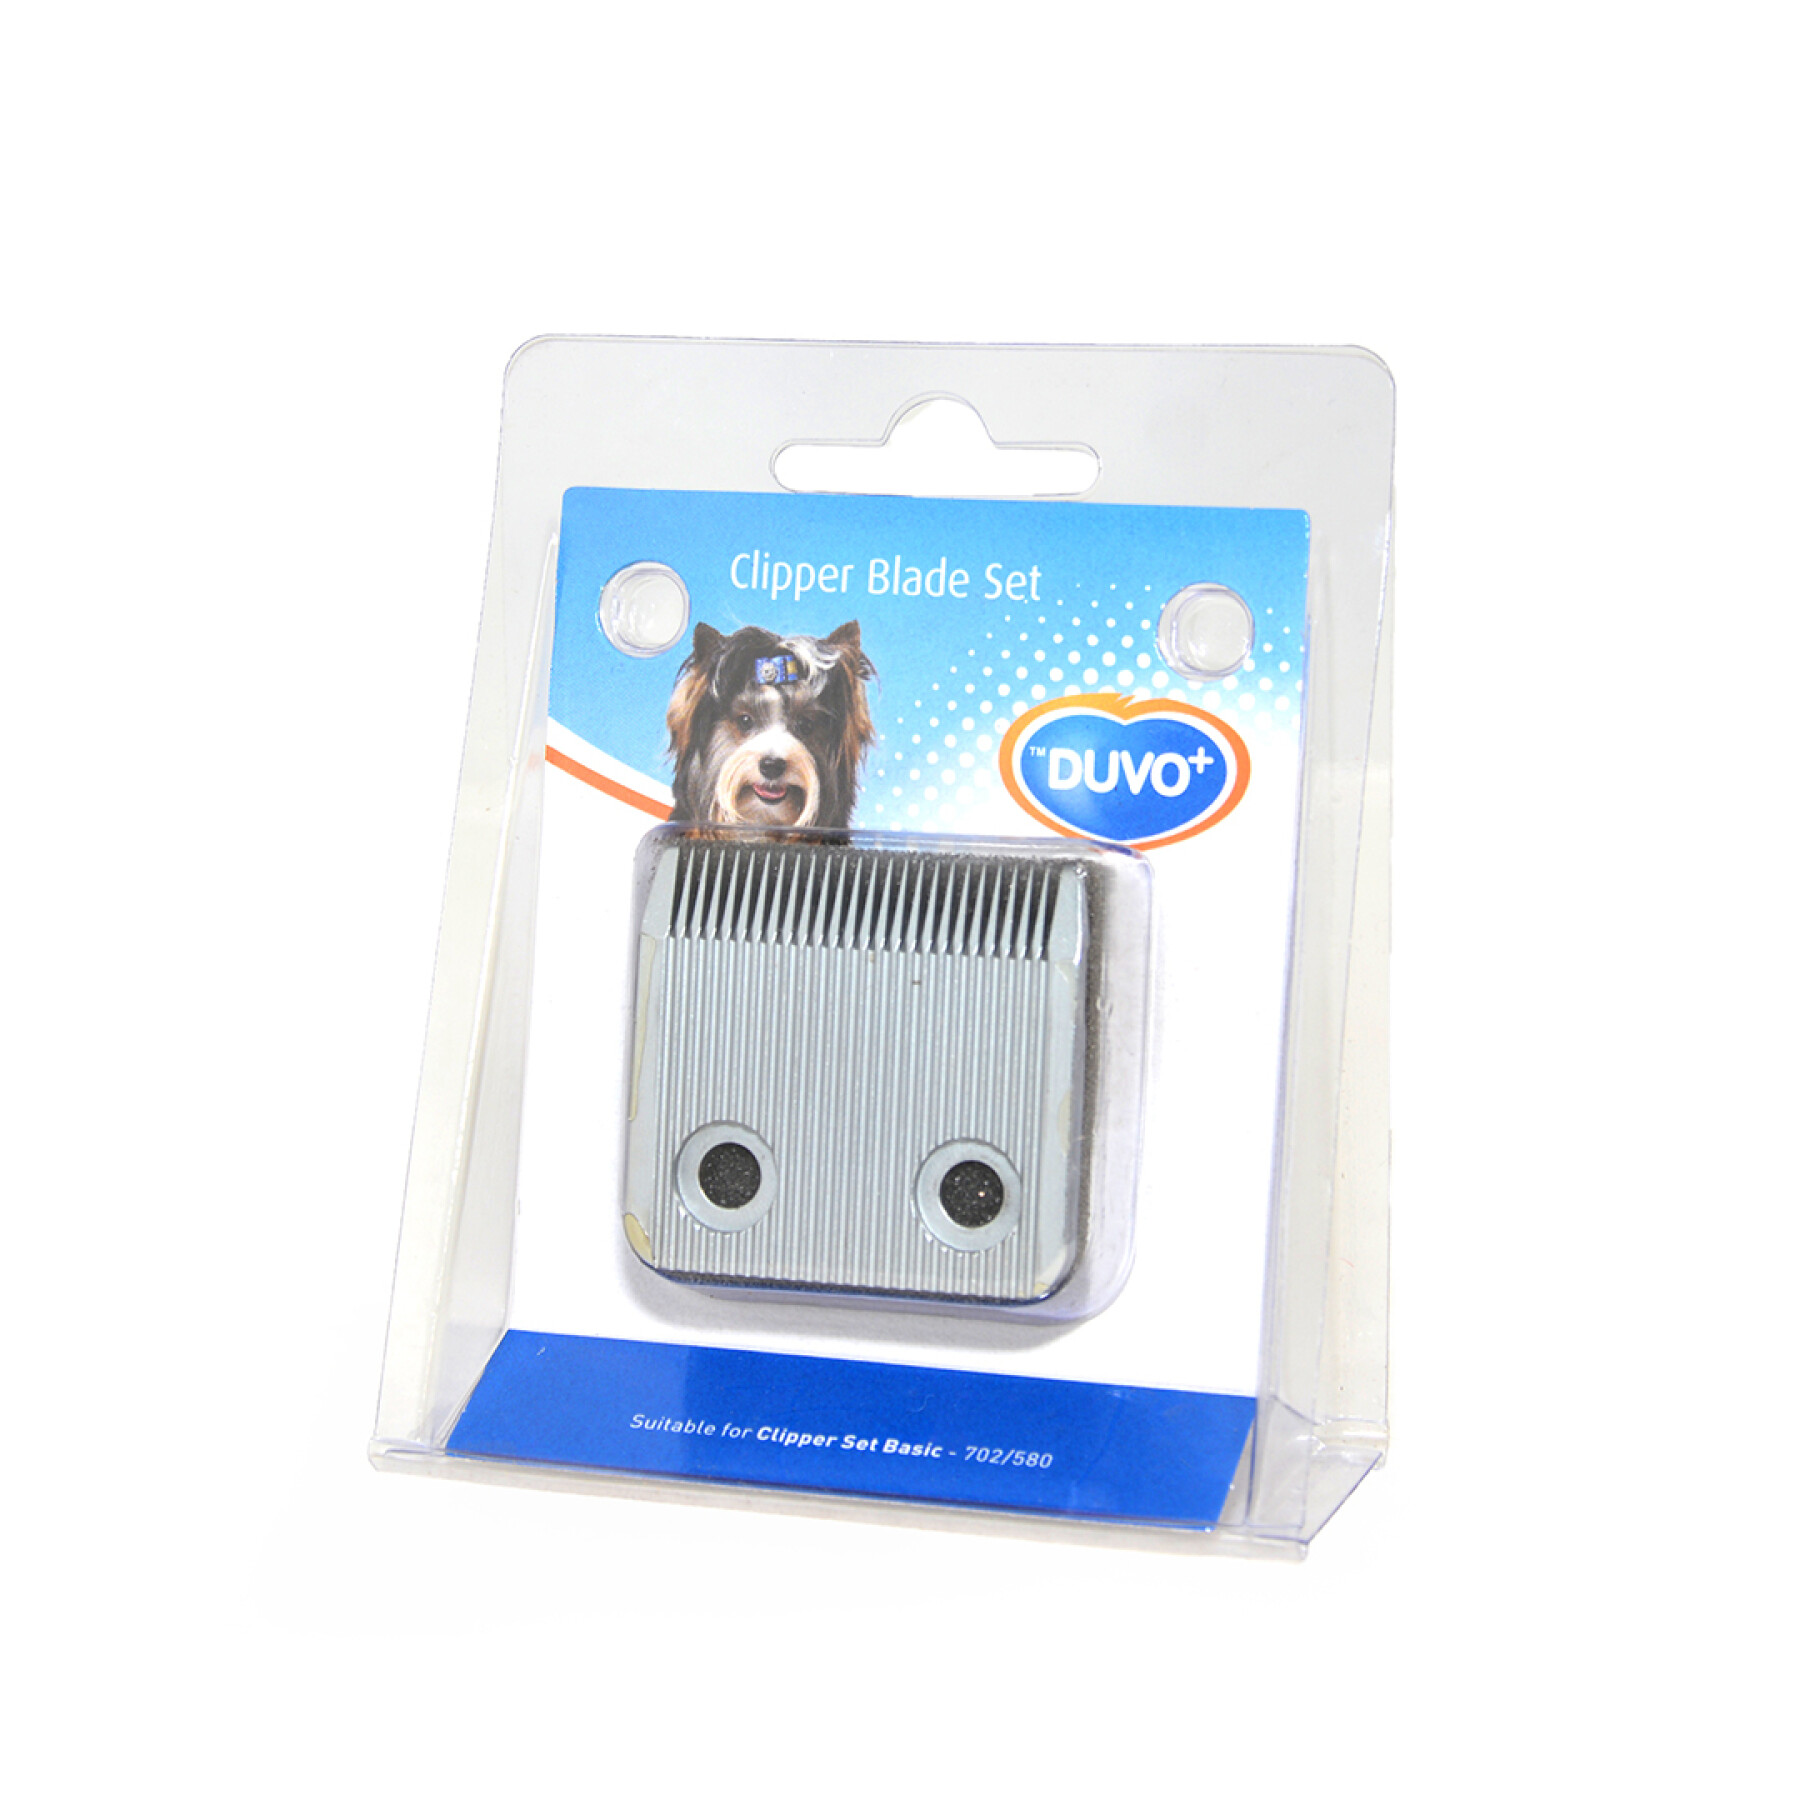 Blade for dog clippers Duvoplus Basic